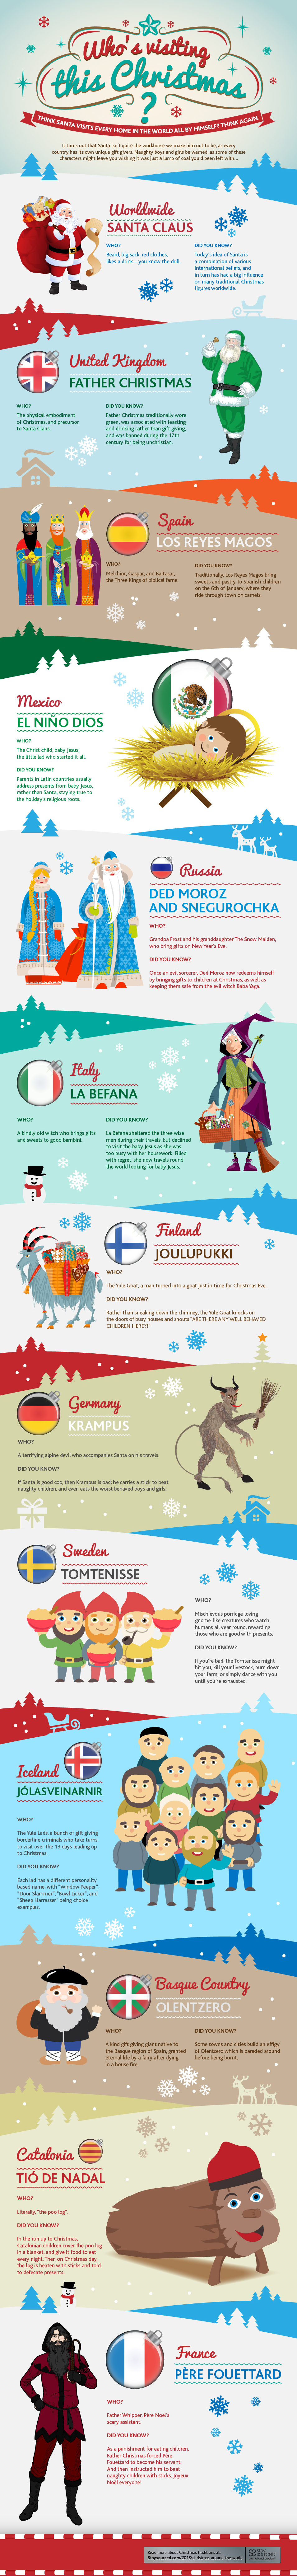 Father Christmas, Stay Sourced, infographic